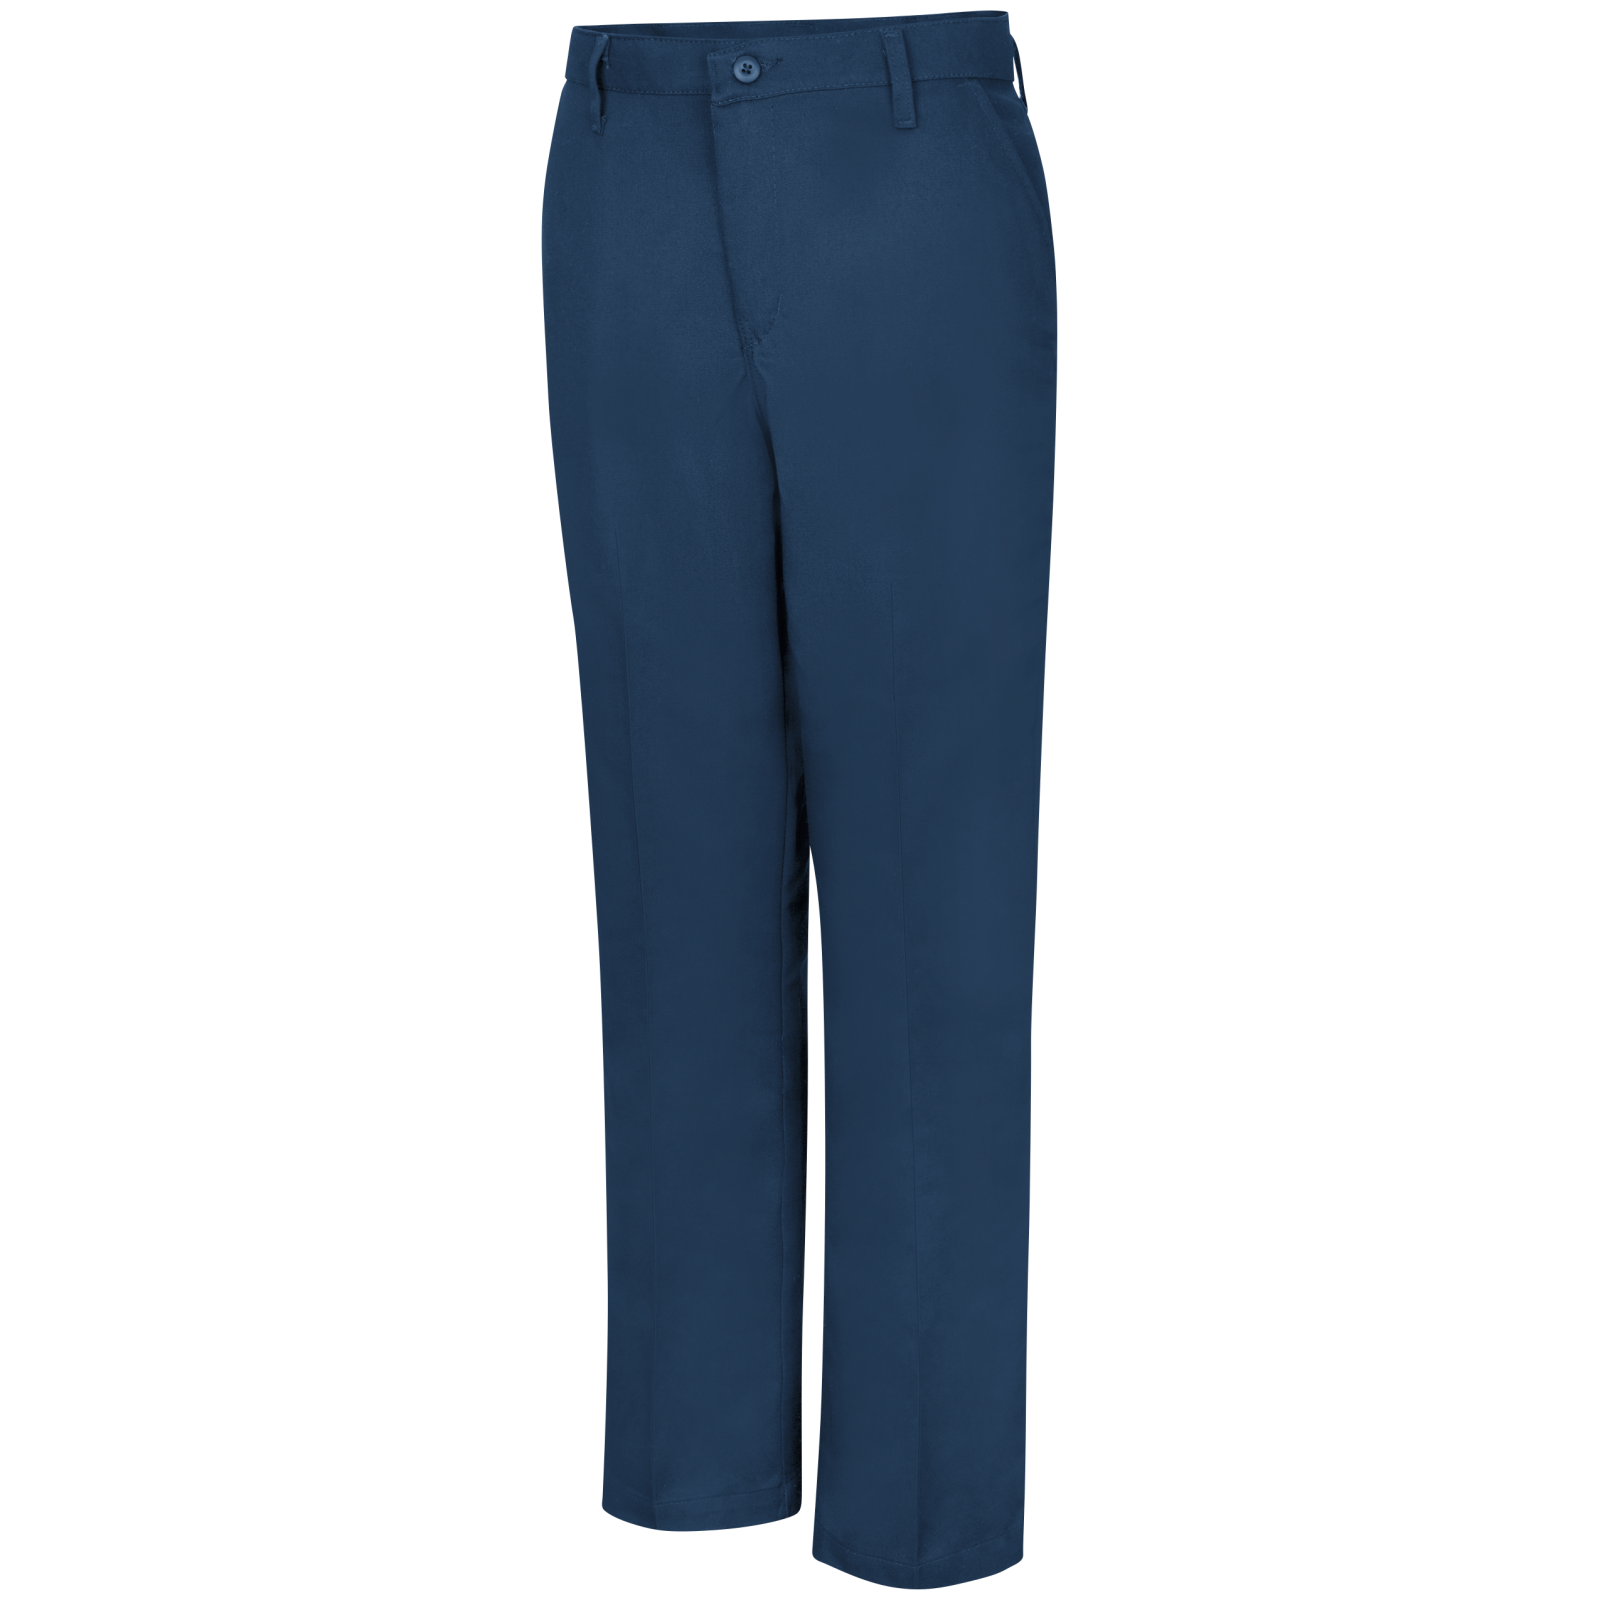 Natural Stretch Twill Suit Pants - Royal Blue | Charles Tyrwhitt